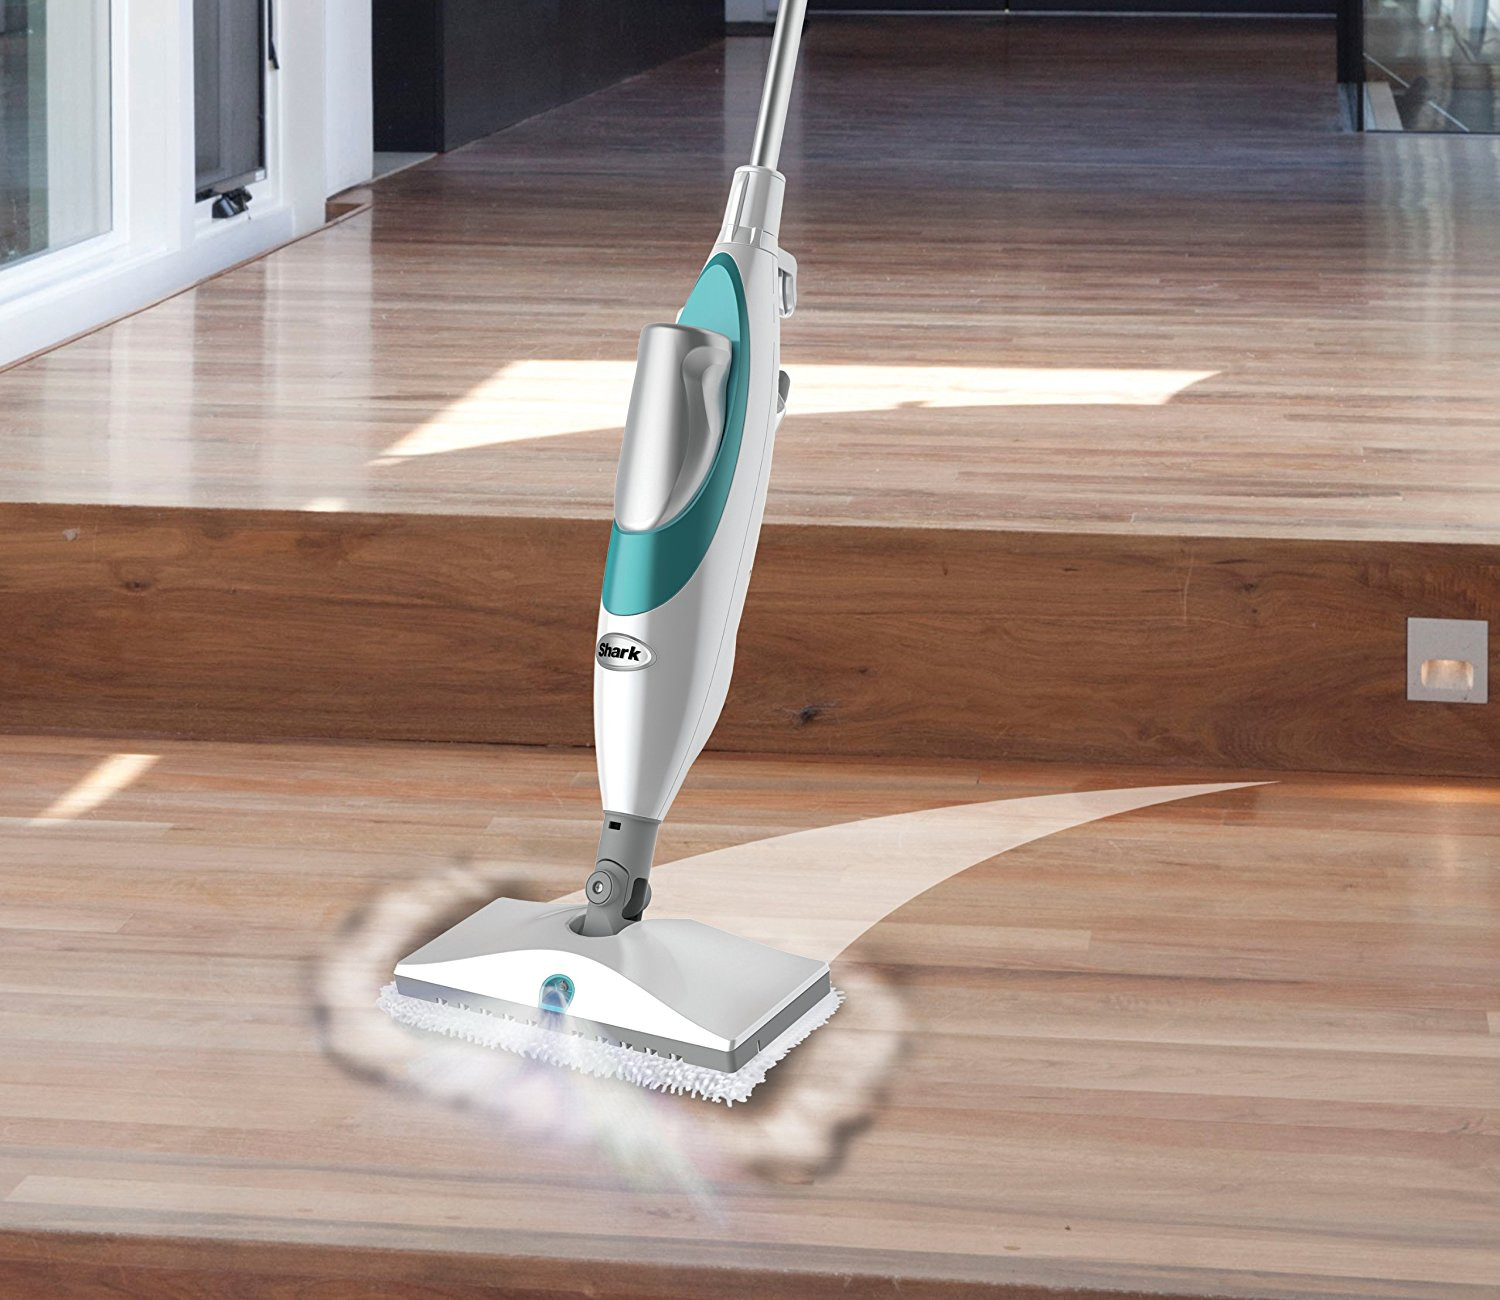 23 Awesome Steam Cleaning Mop for Hardwood Floors 2024 free download steam cleaning mop for hardwood floors of hardwood floor steam mop dahuacctvth com regarding hardwood floor steam mop